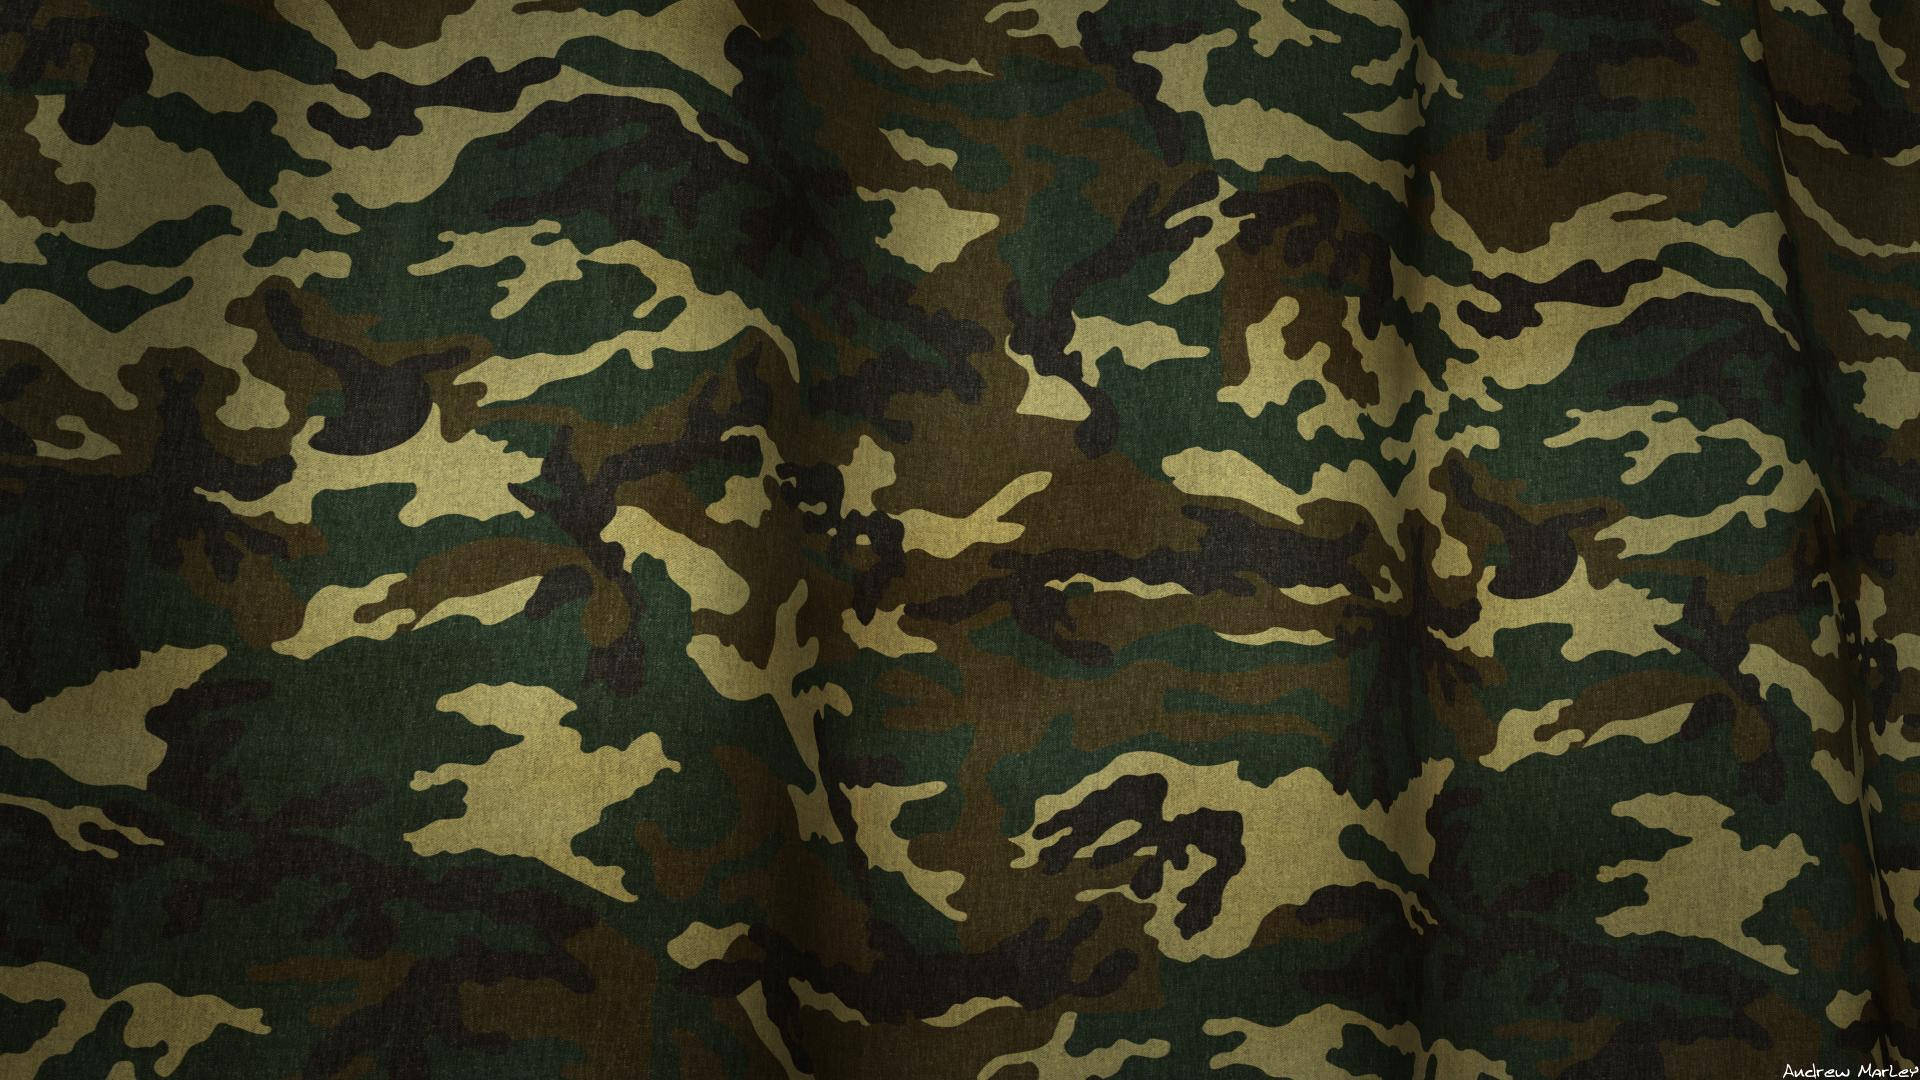 Free Camo Wallpaper Downloads, [100+] Camo Wallpapers for FREE | Wallpapers .com